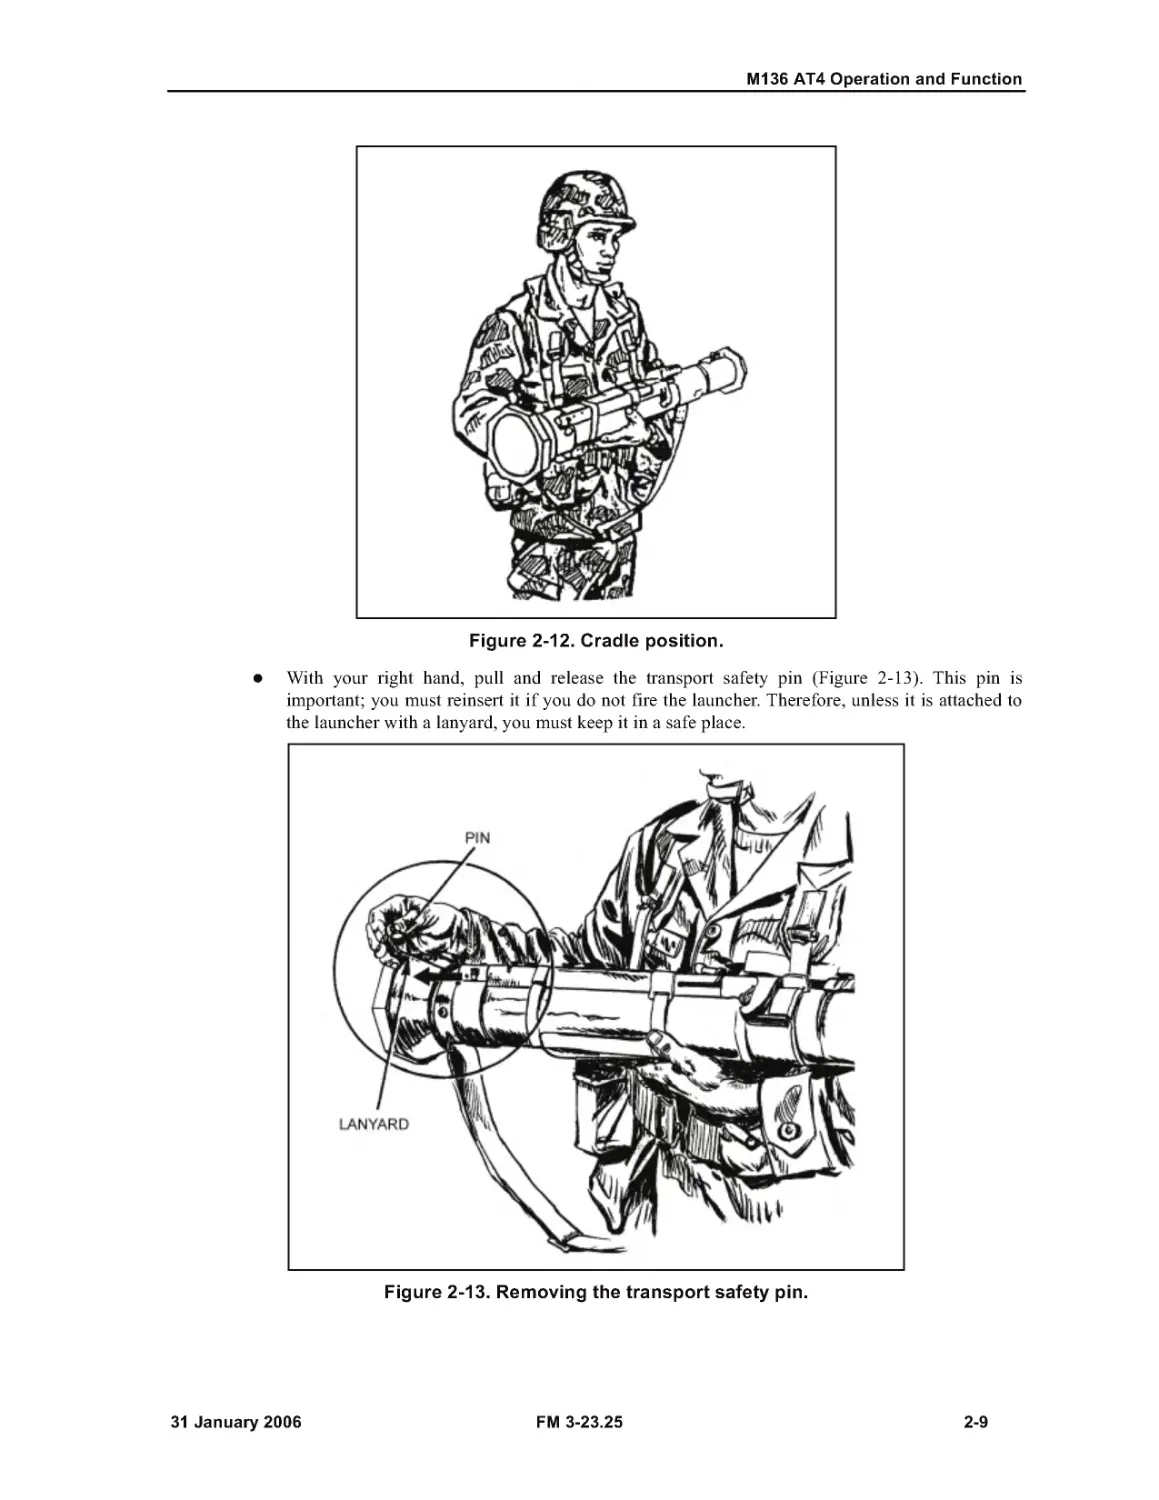 Figure 2-12. Cradle position.
Figure 2-13. Removing the transport safety pin.